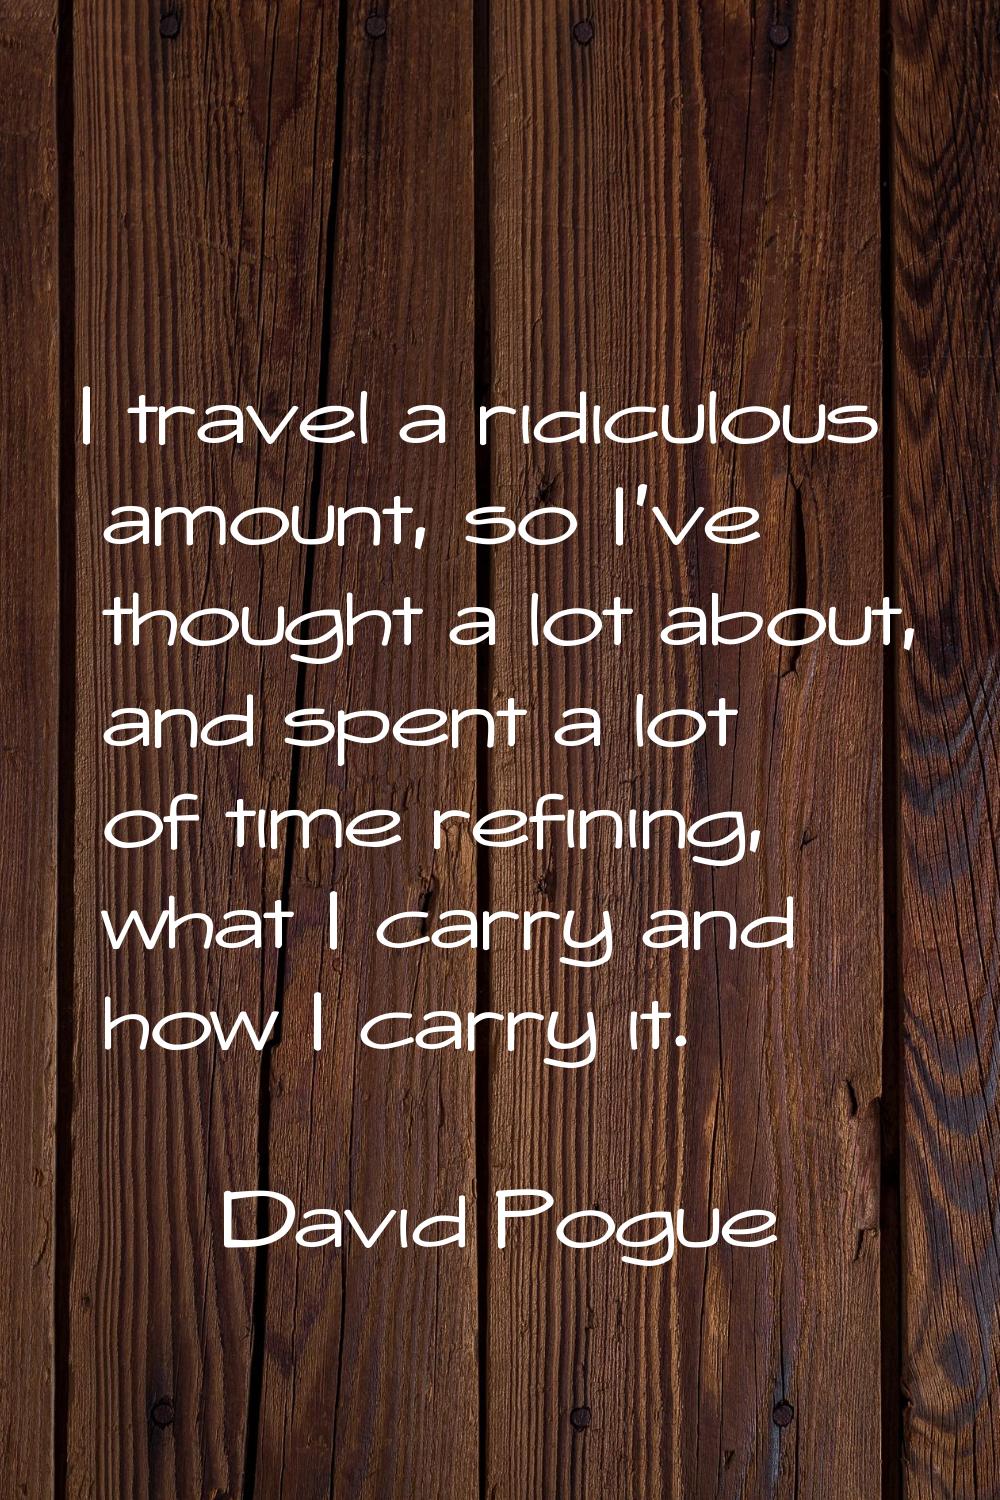 I travel a ridiculous amount, so I've thought a lot about, and spent a lot of time refining, what I